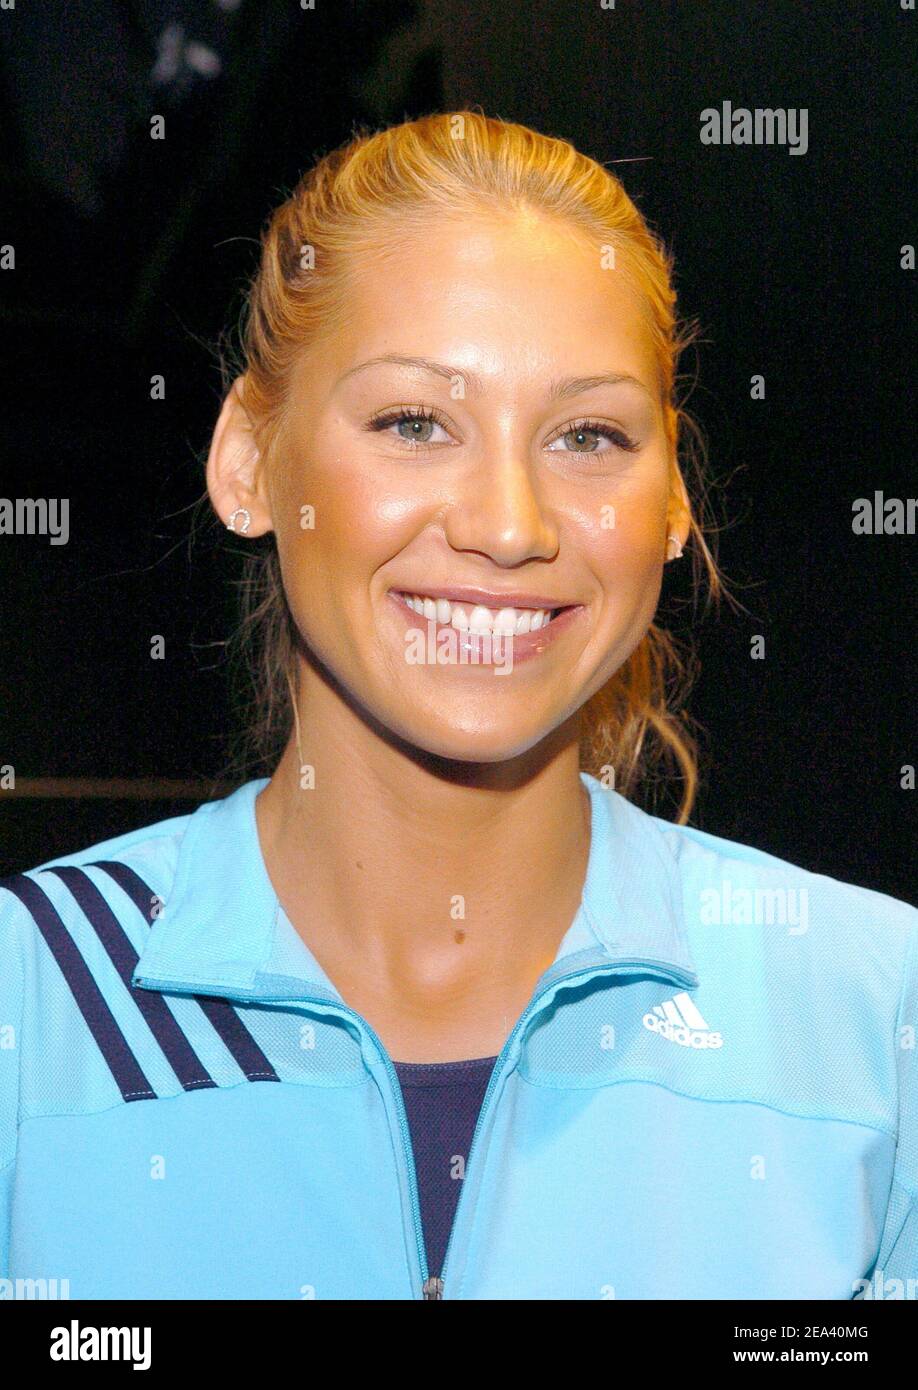 Tennis player Anna Kournikova attends the Opening of the largest 'Adidas  Sport Performance Store' in the World, at Downtown Manhattan in New York,  USA, on May 7, 2005. Photo by Slaven Vlasic/CAMELEON/ABACA